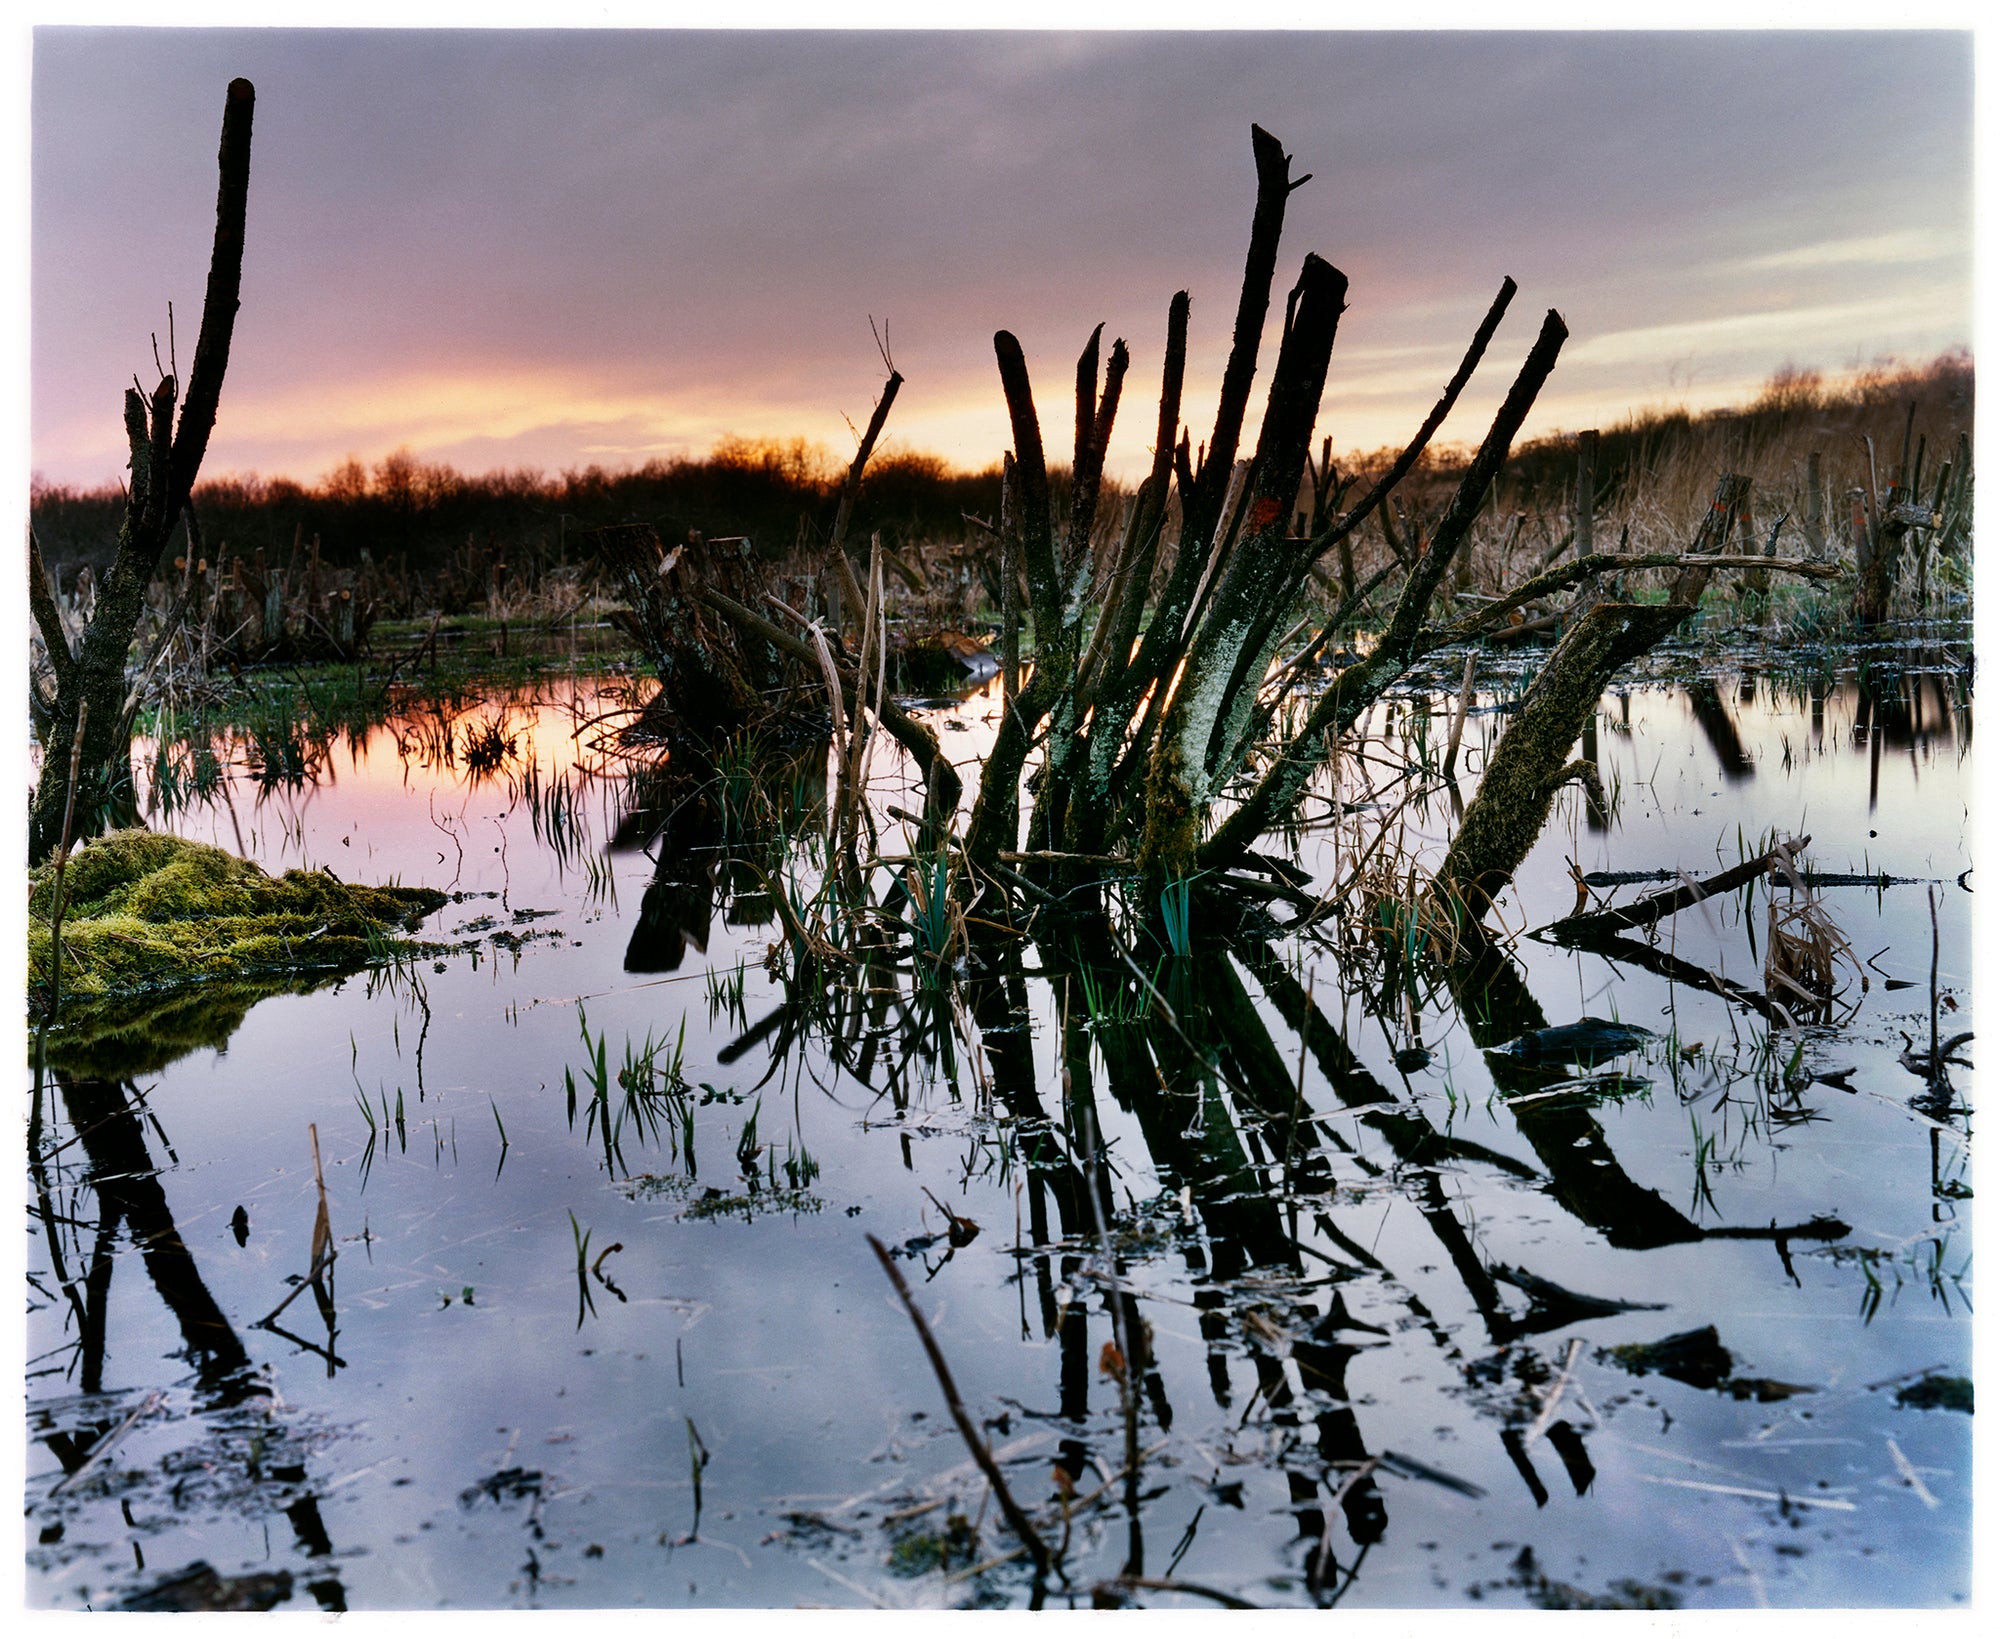 Photograph by Richard Heeps. Photograph of cut down, lichen clad branches poking out of the flooded fen field. The branches are strikingly dark and create dark reflections with a golden sunset in the background.